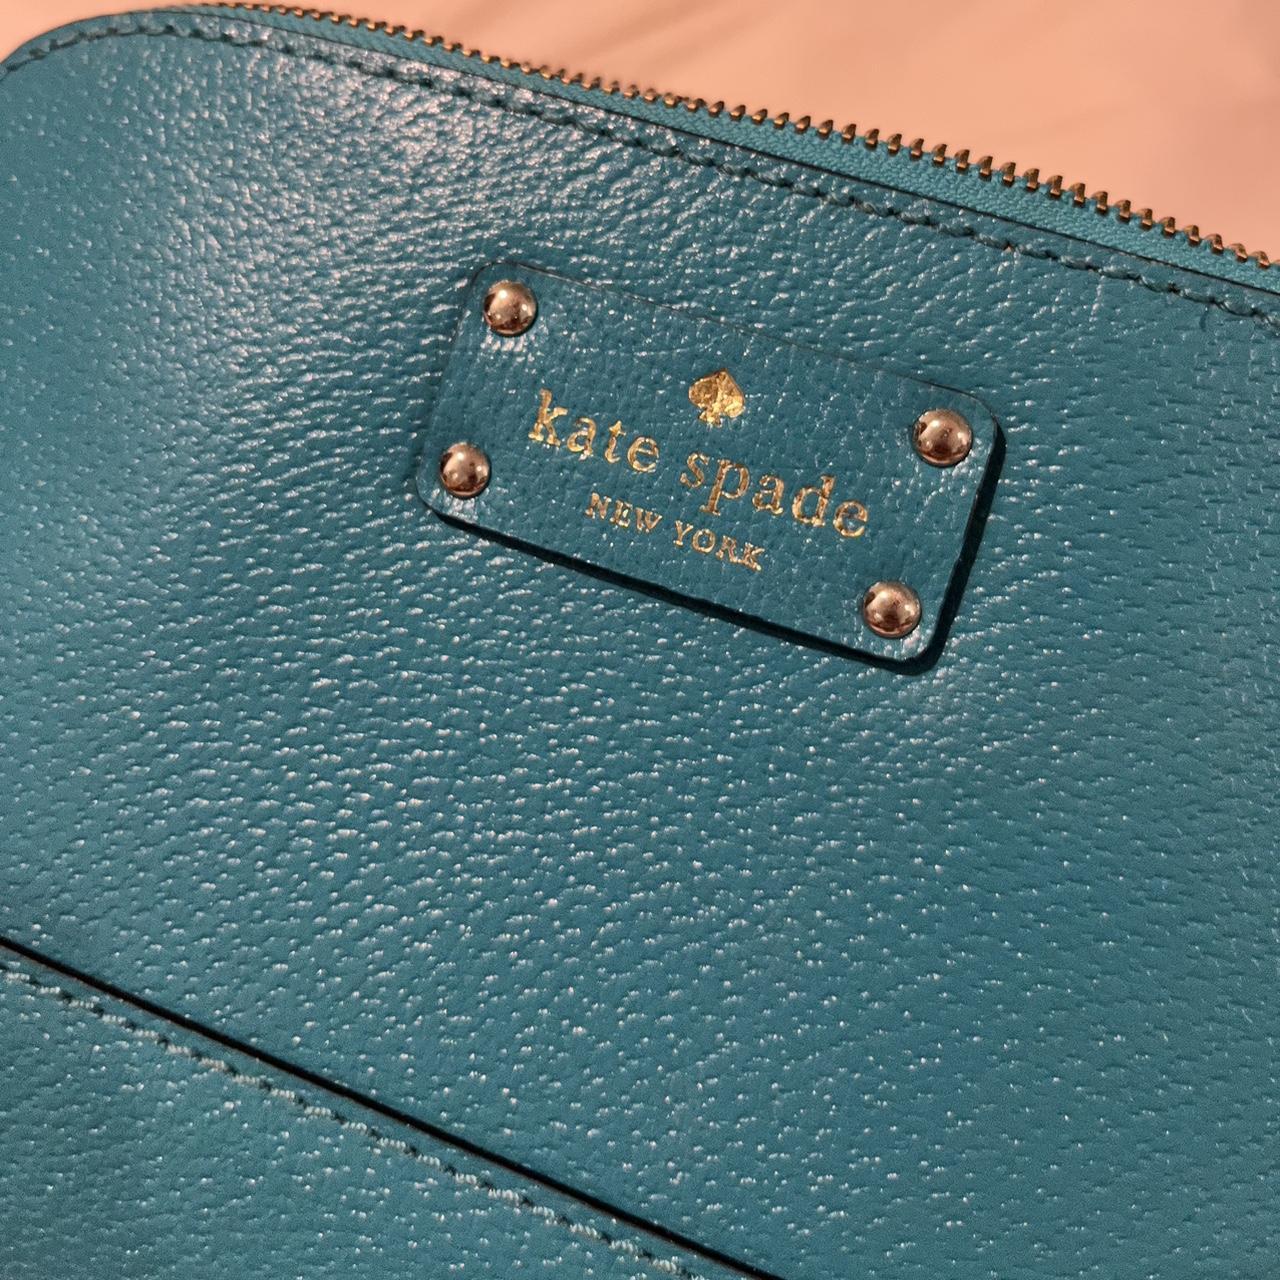 Kate spade yellow crossbody. Leather. Some scratches - Depop